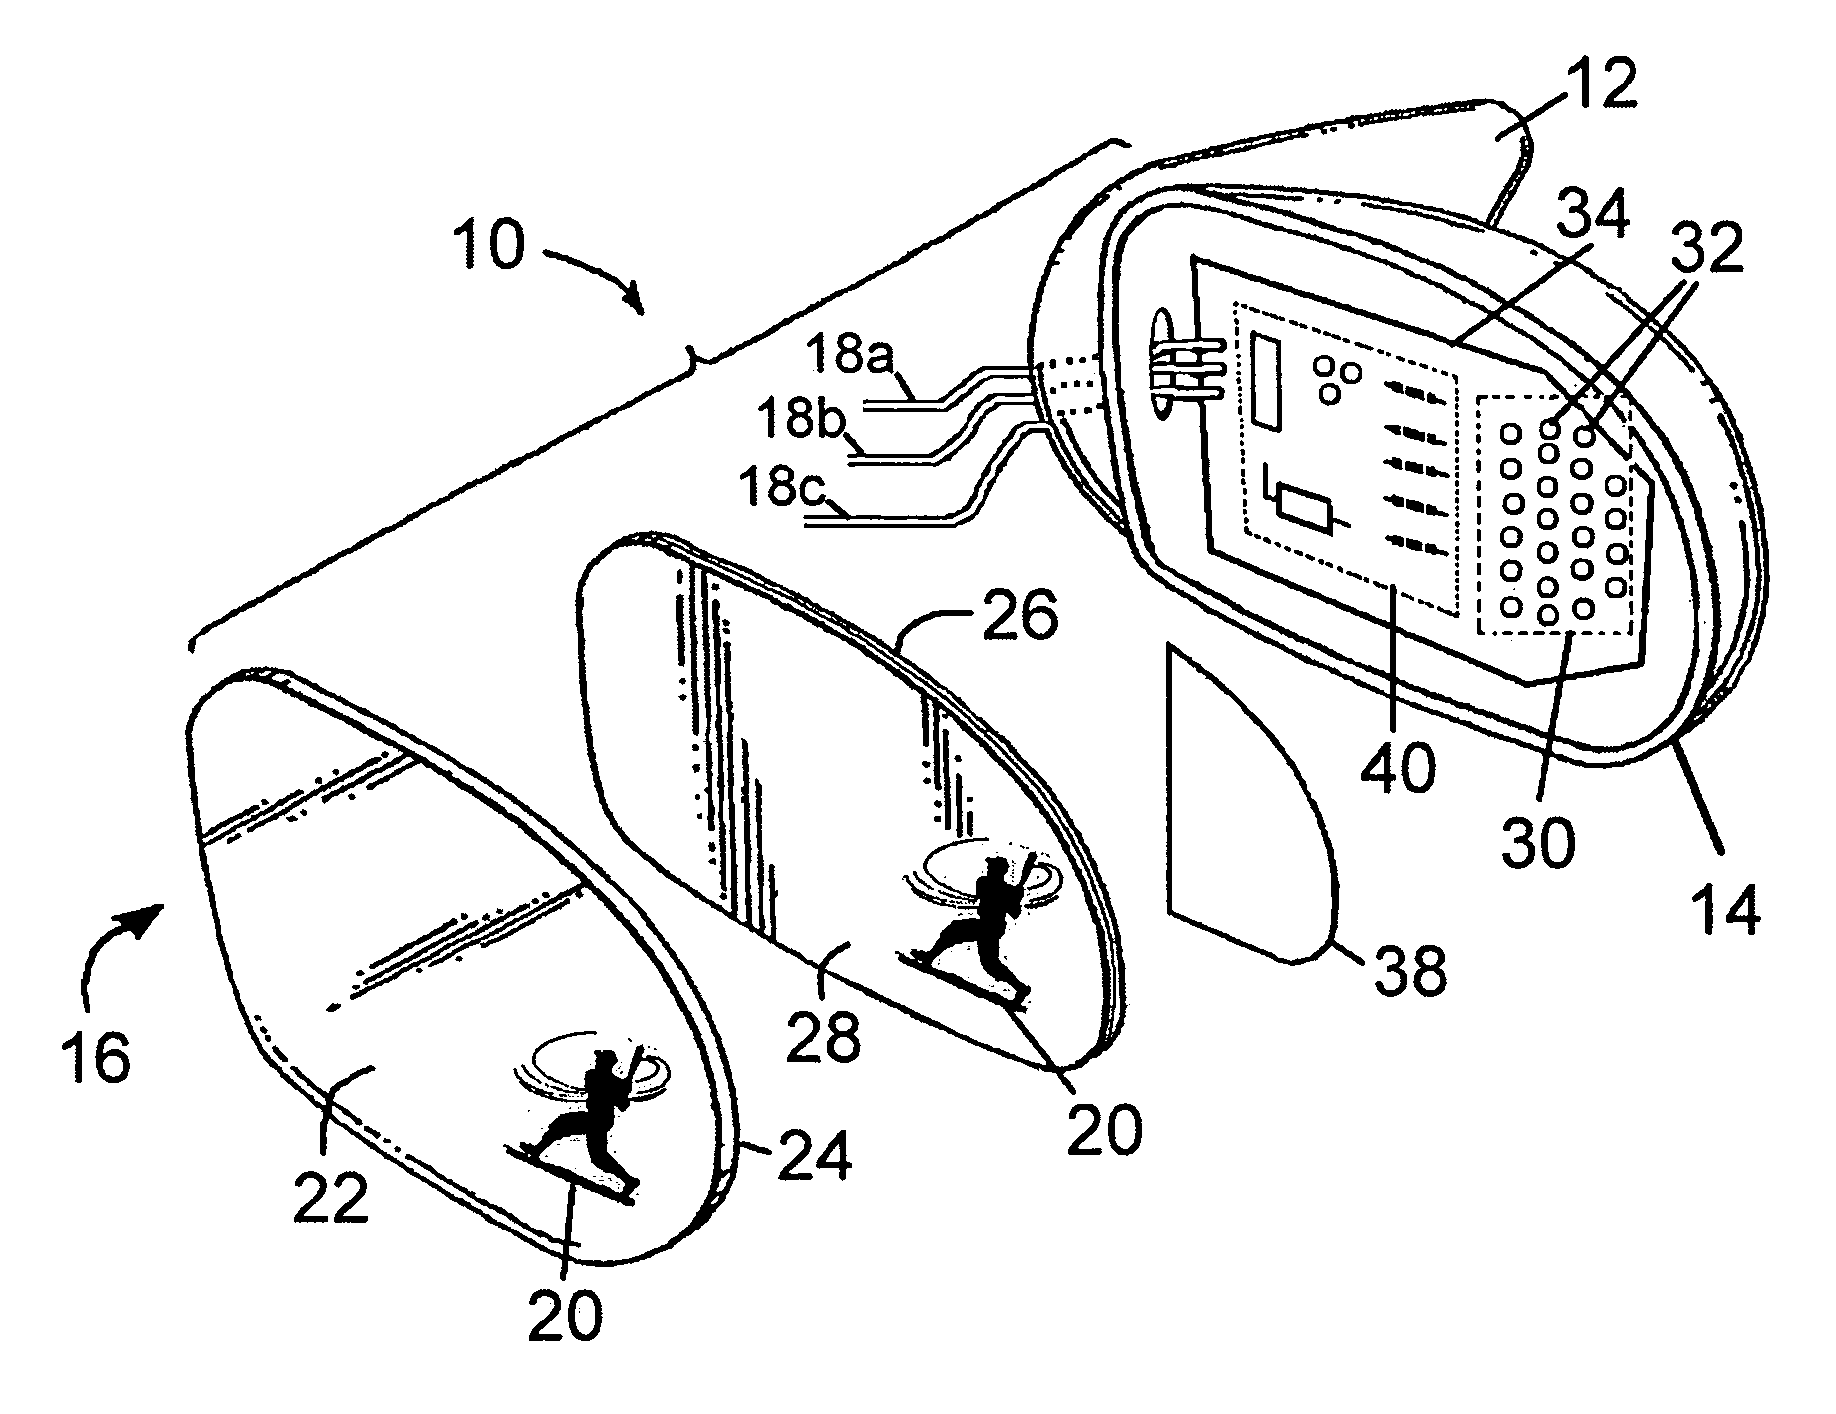 Rearview mirror assembly with running lights